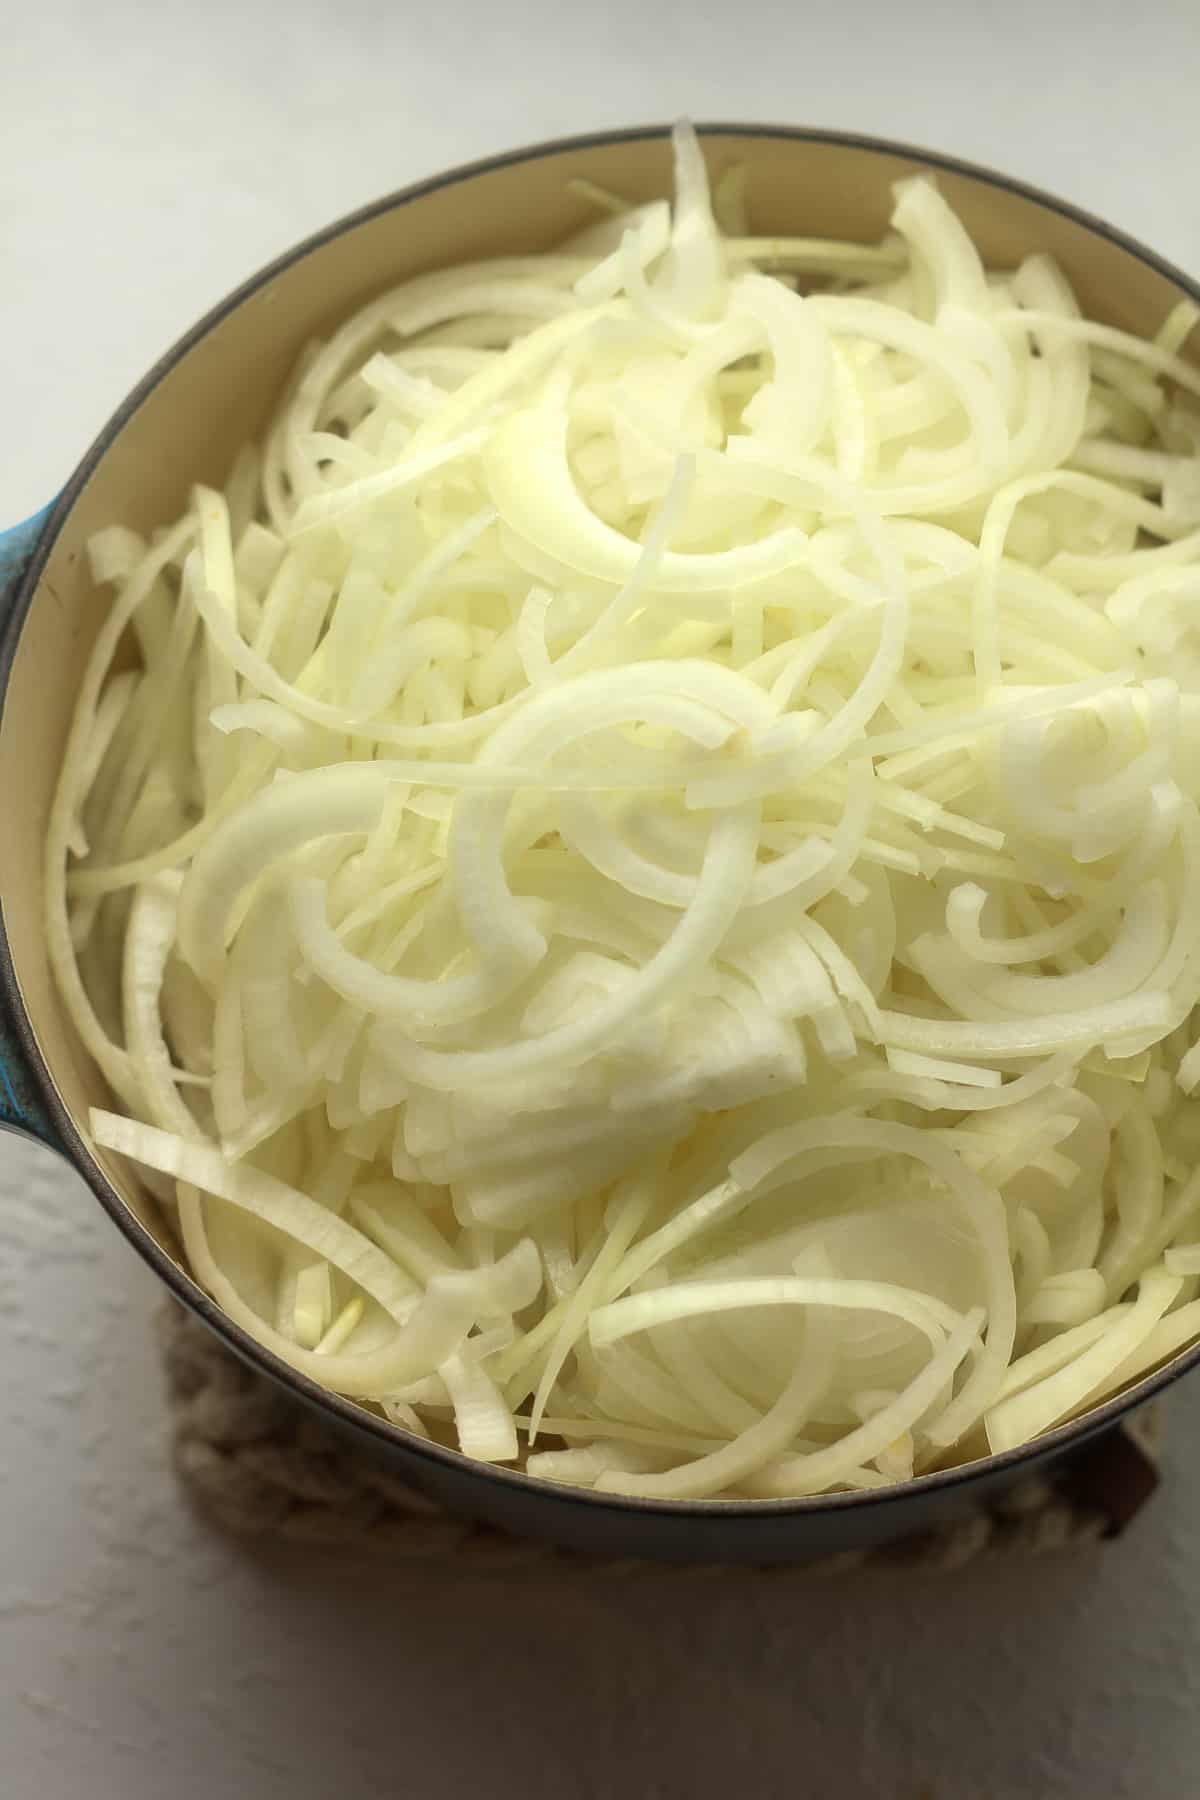 The pot with the sliced onions to the top.